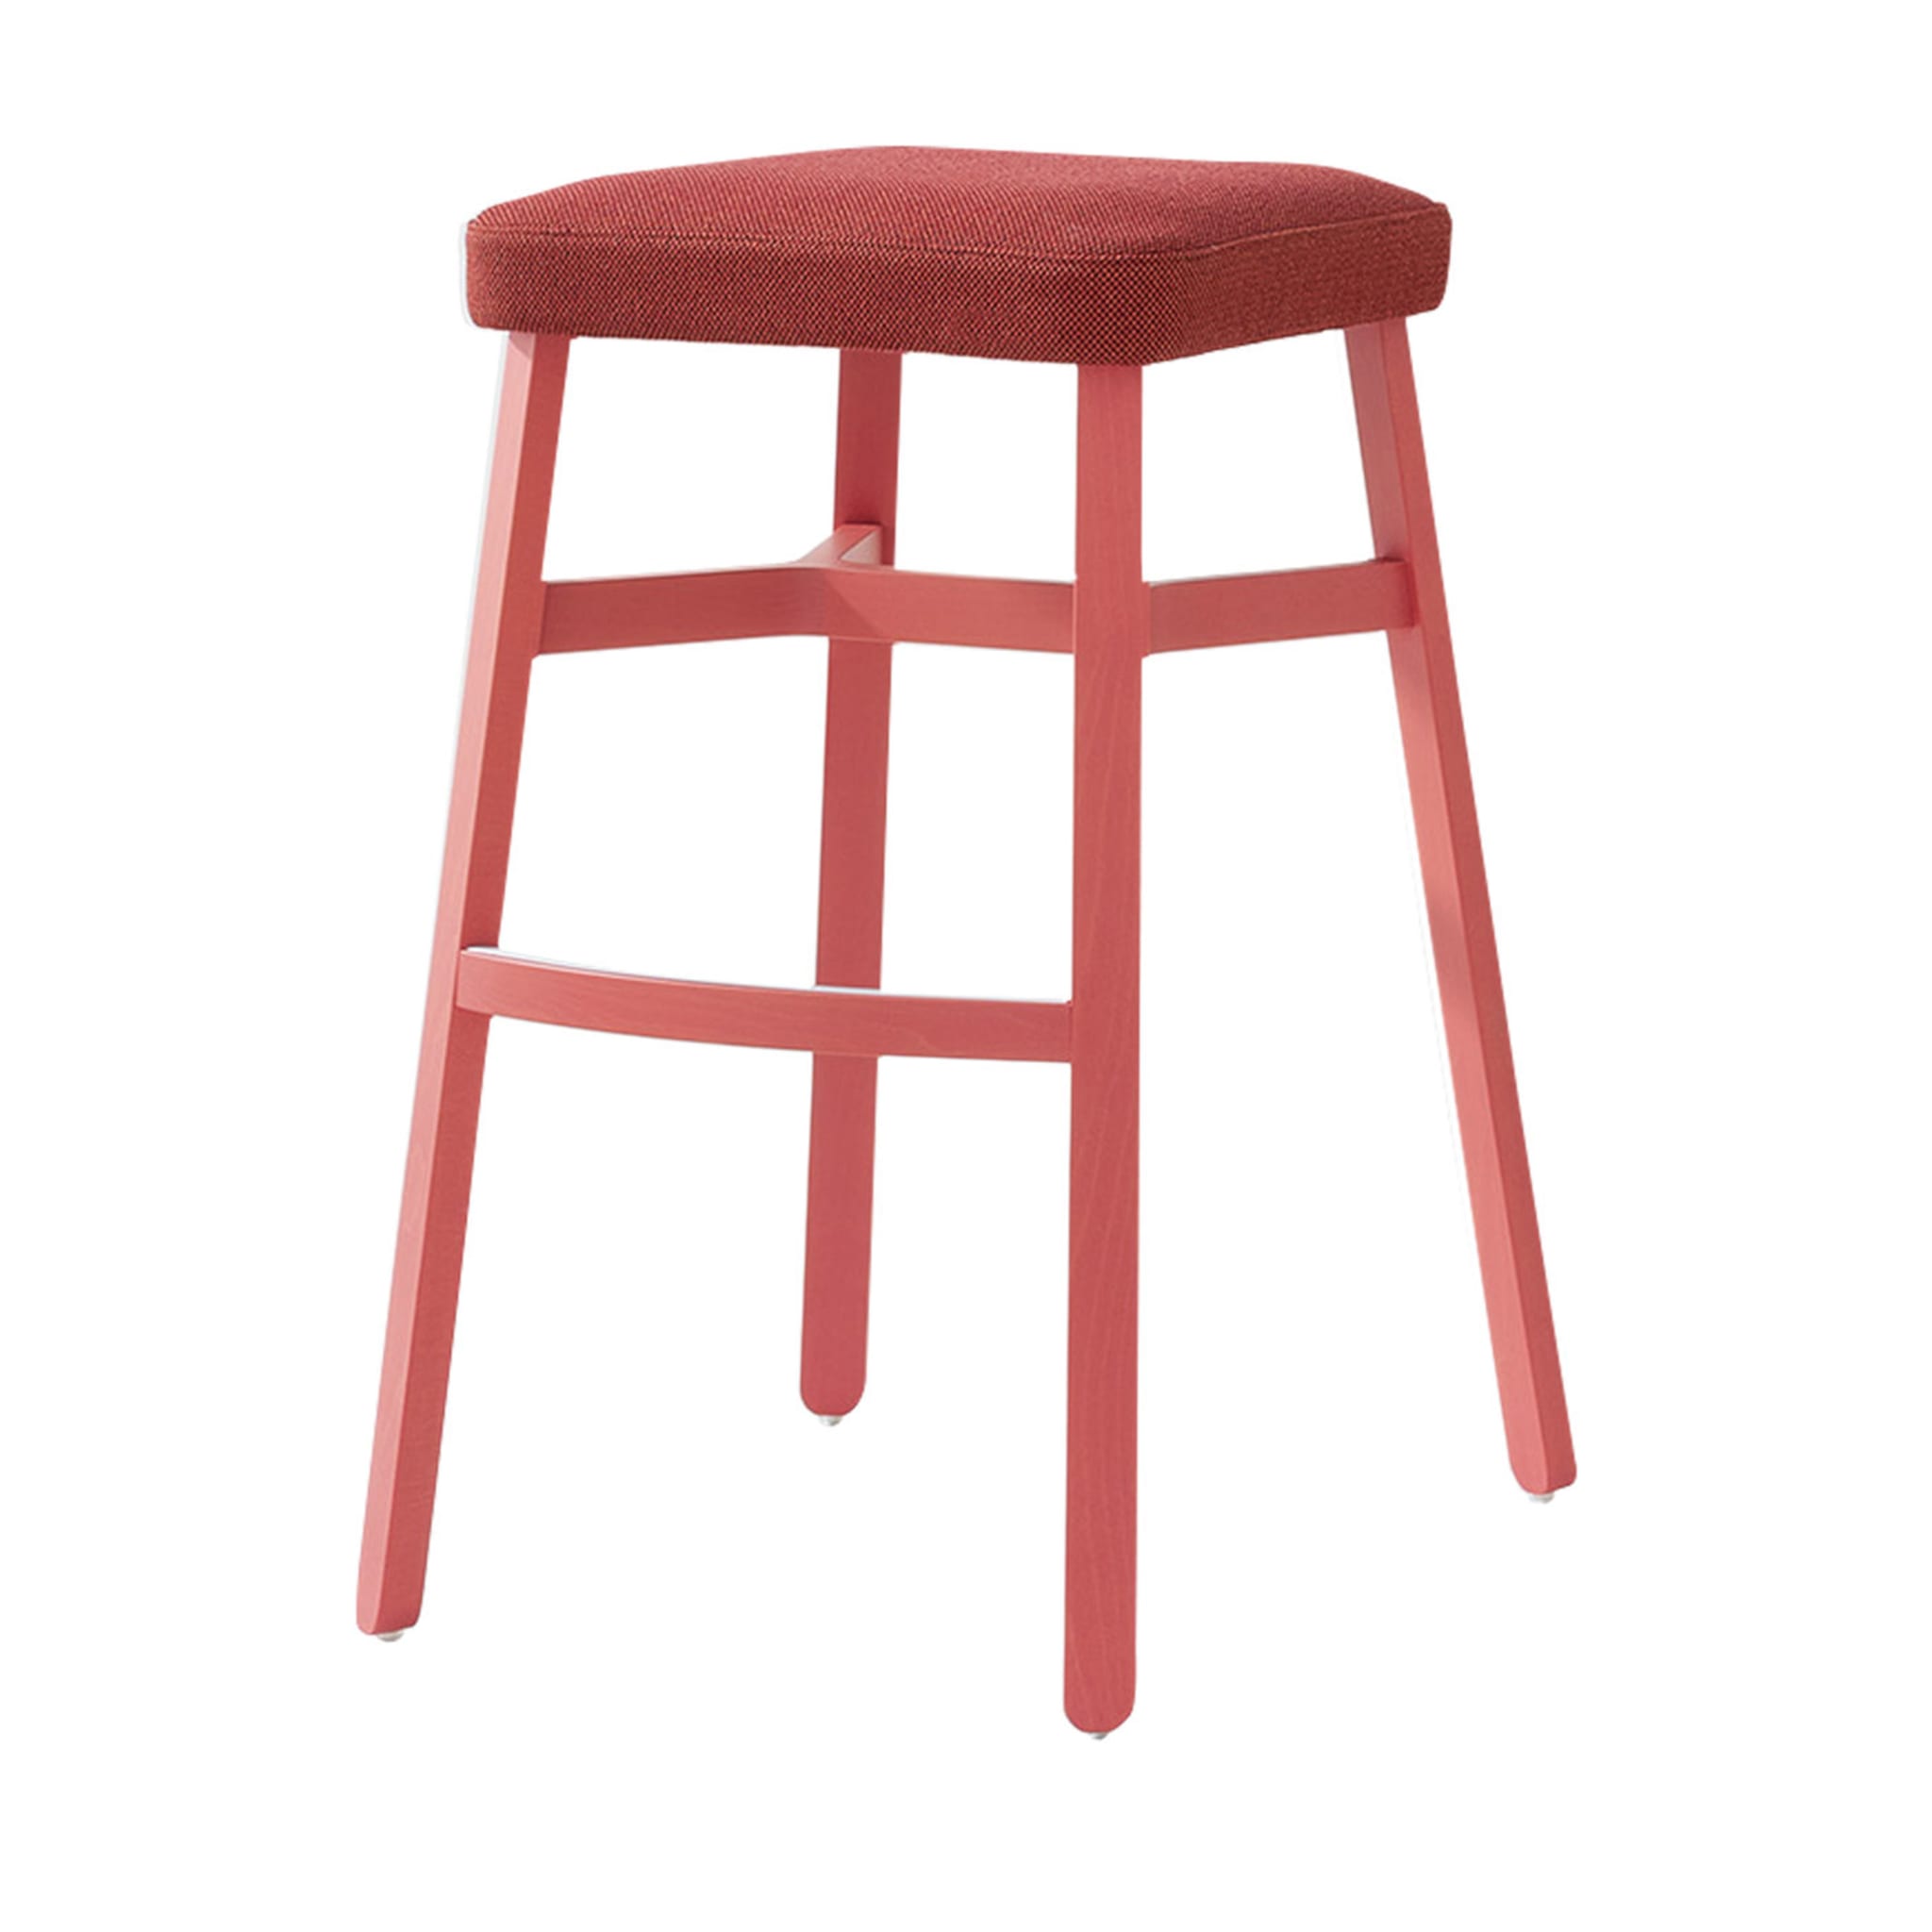 Croissant 578 Red Stool by Emilio Nanni - Main view